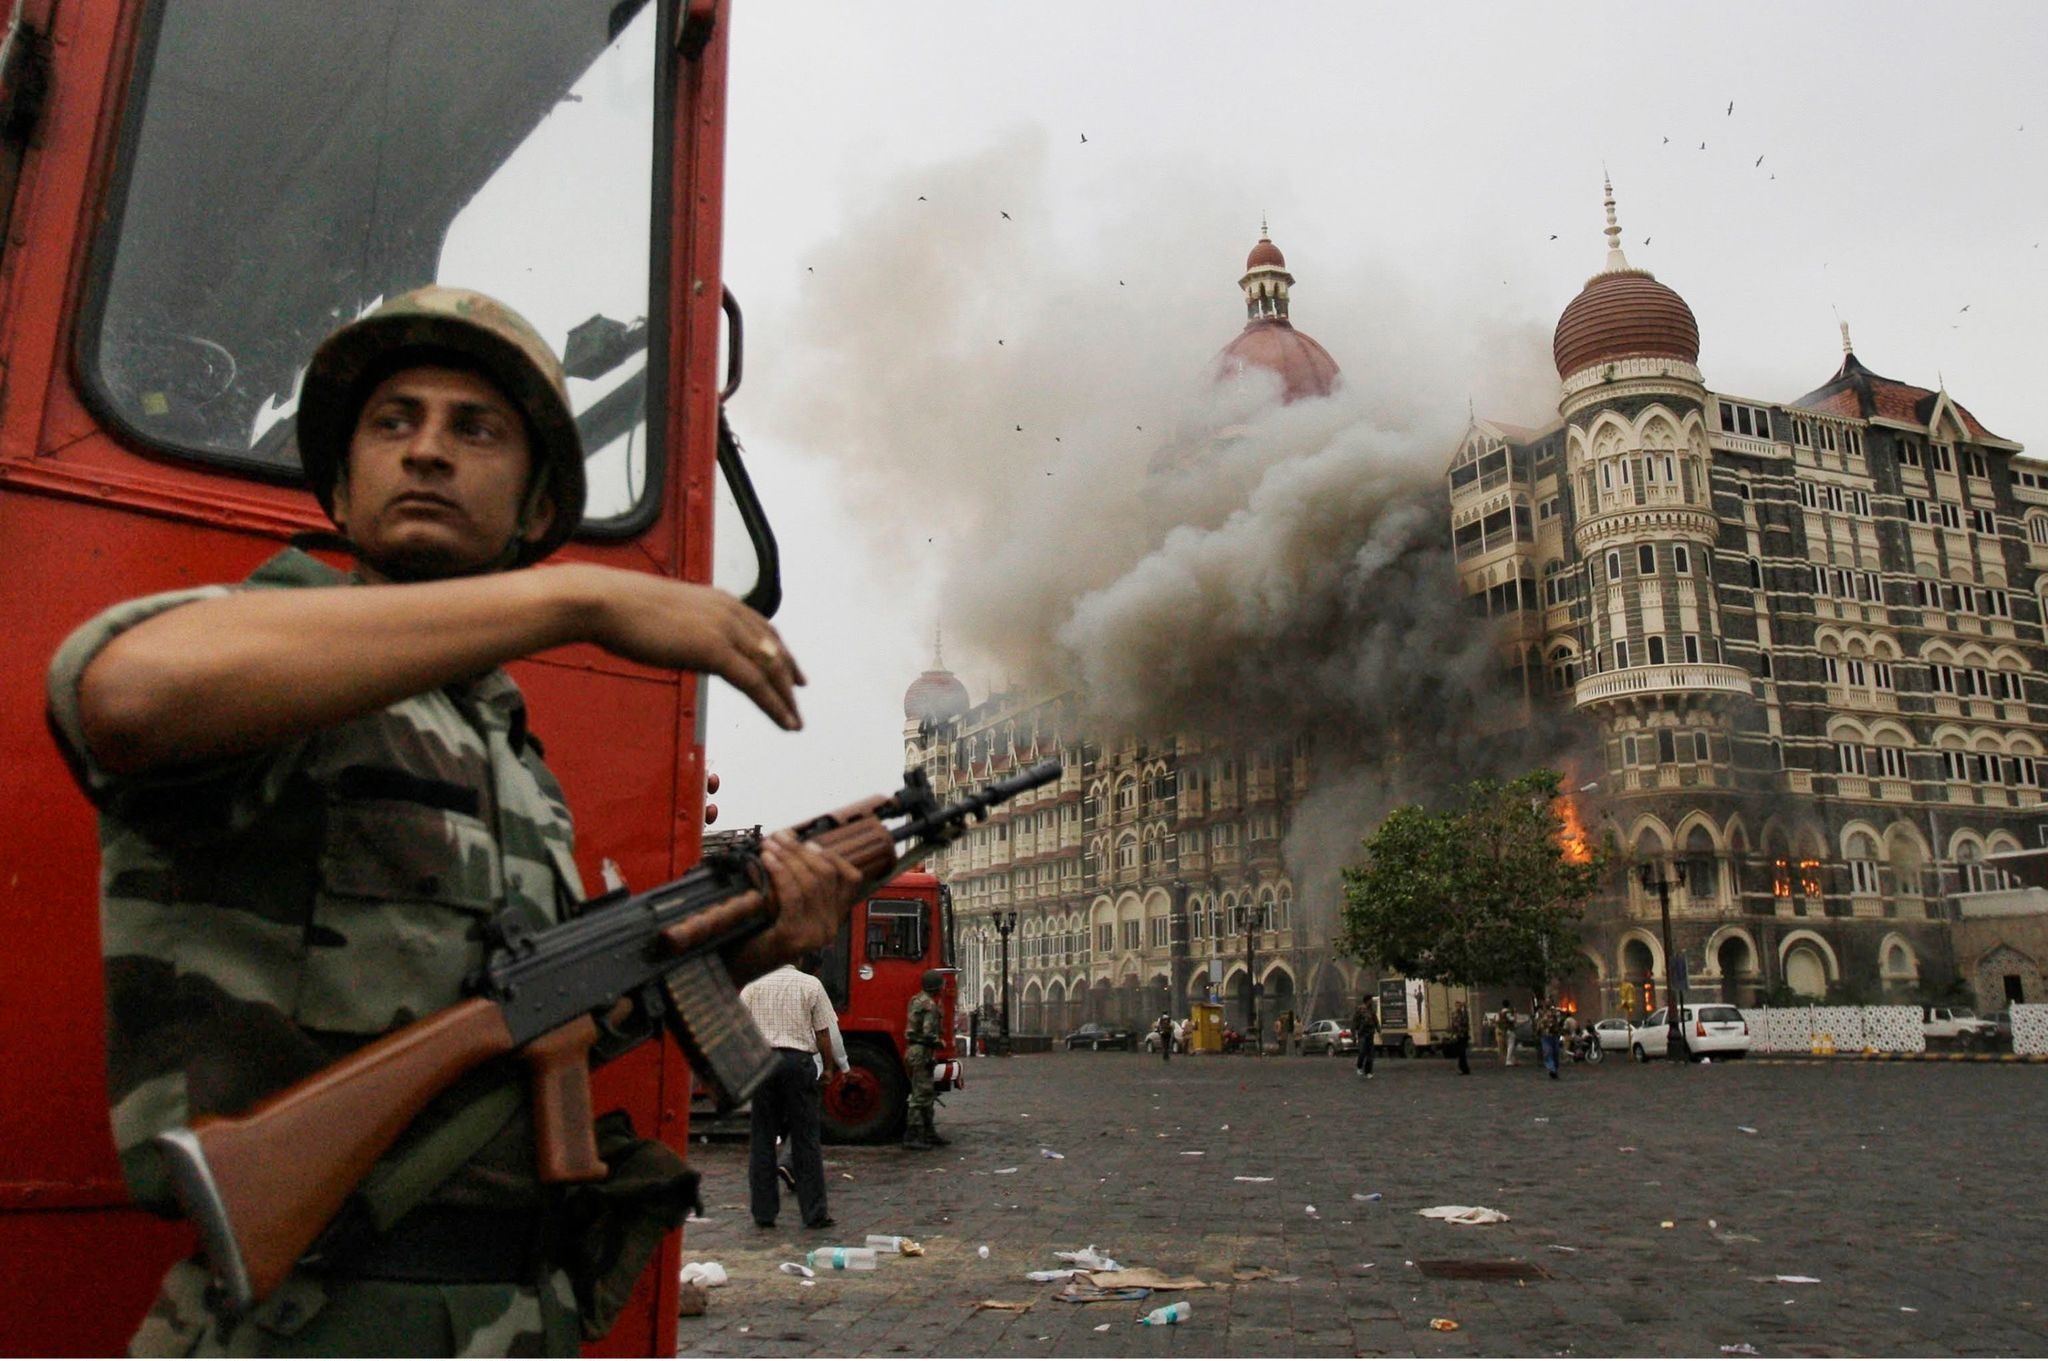 River journalist talks about experience of witnessing 26/11 Mumbai attacks